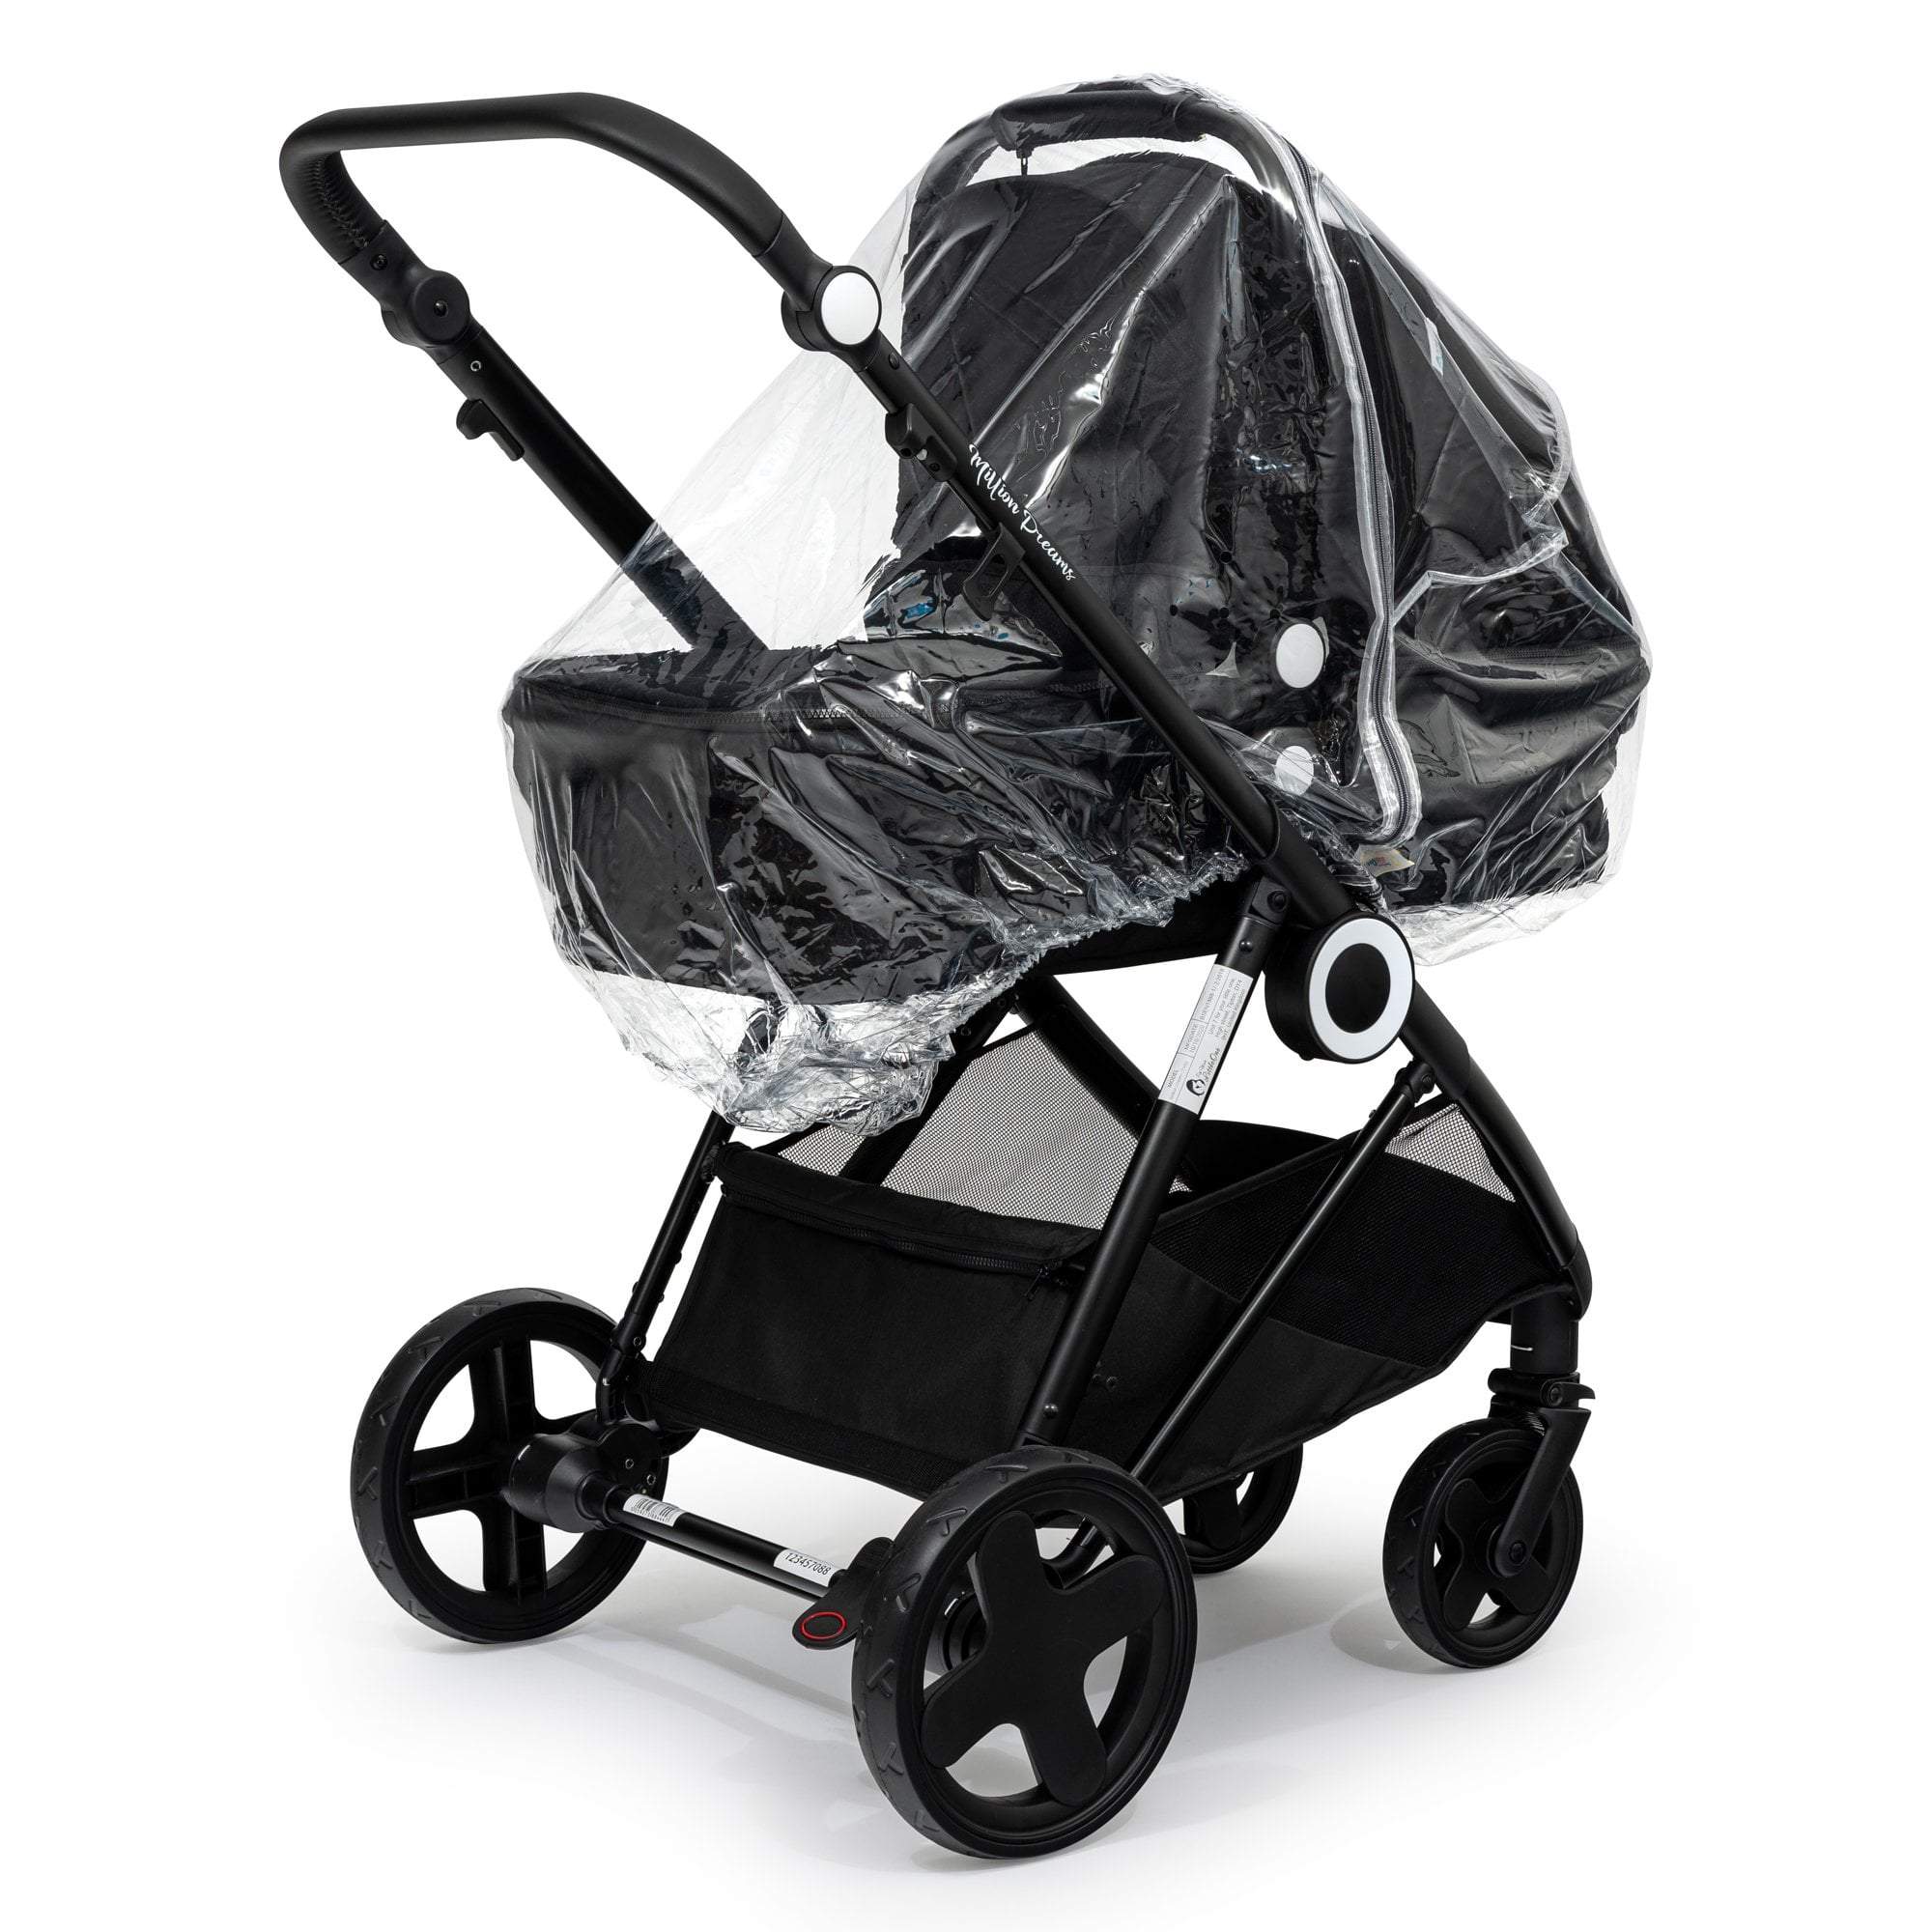 Carrycot Raincover Compatible With I'coo - Fits All Models - For Your Little One